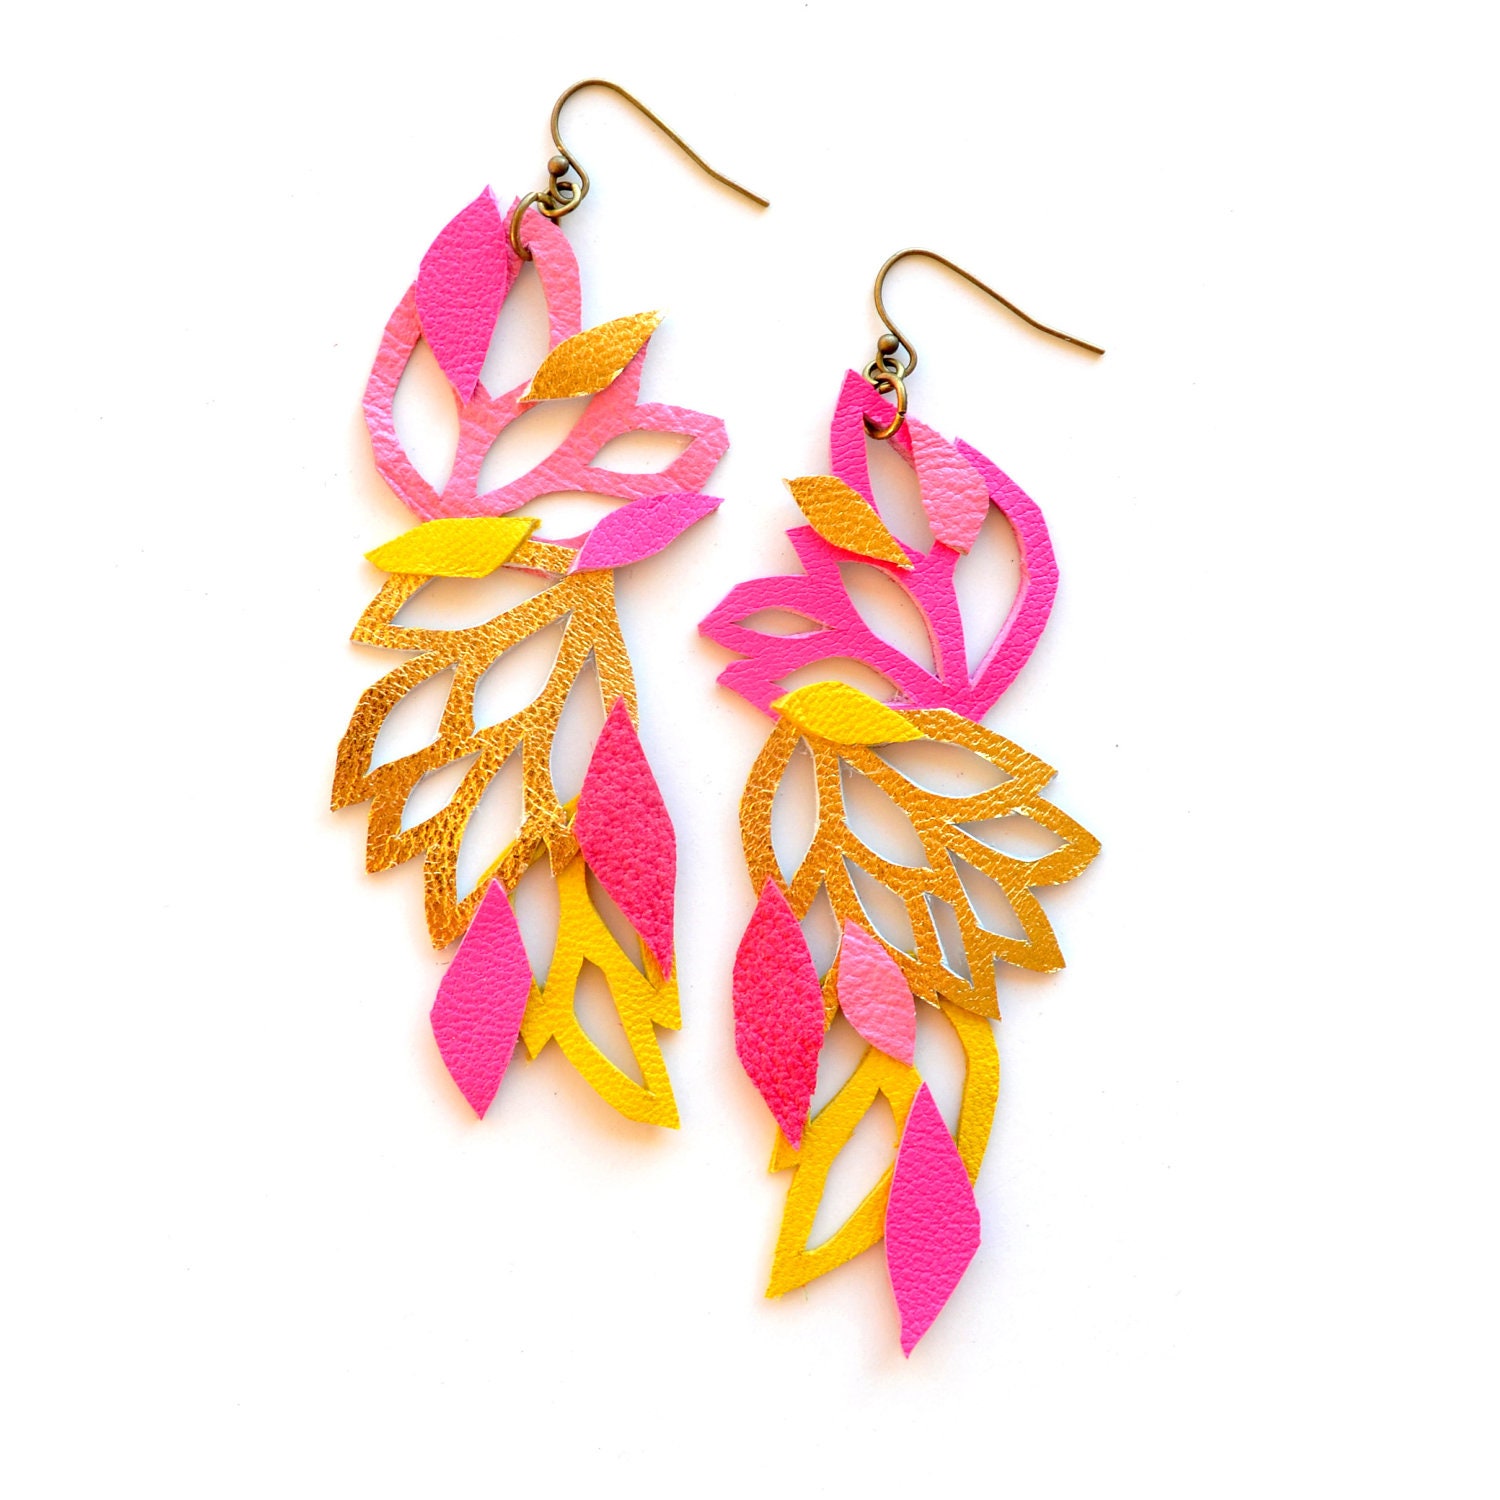 Neon Leather Earrings Color Block Lace Floral and Leaves - Statement Earrings - BooandBooFactory